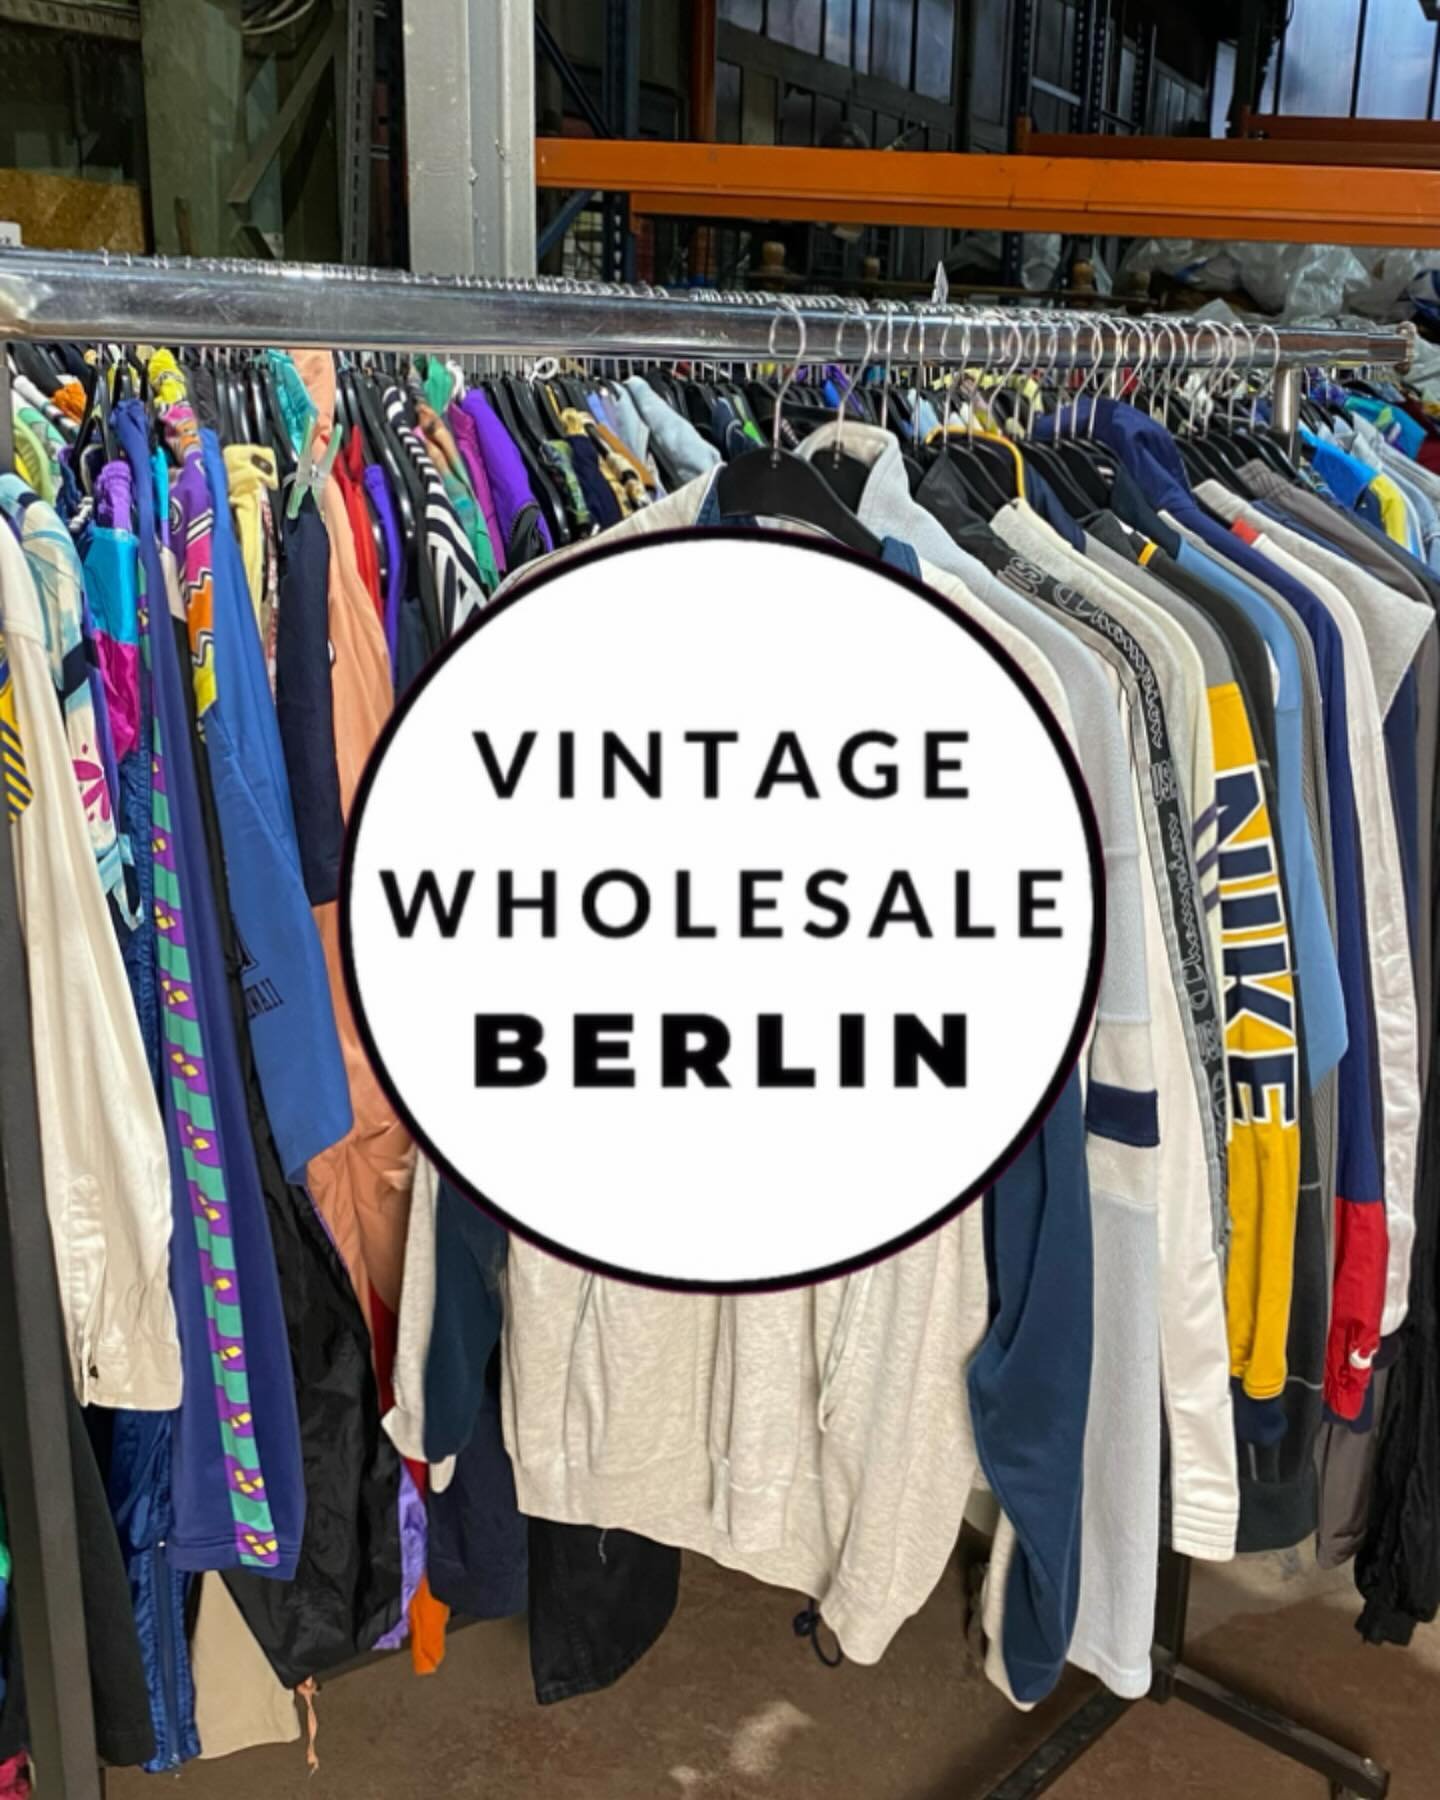 VINTAGE SPORTSWEAR
👇 @vintage_wholesale_berlin 👇

We know you&rsquo;re going mad for minimal vintage sportswear brands, so here you go:

Vintage Adidas, Nike, Fila, Kappa, Champion, Puma !

Pieces like these are so very popular on the streets, they